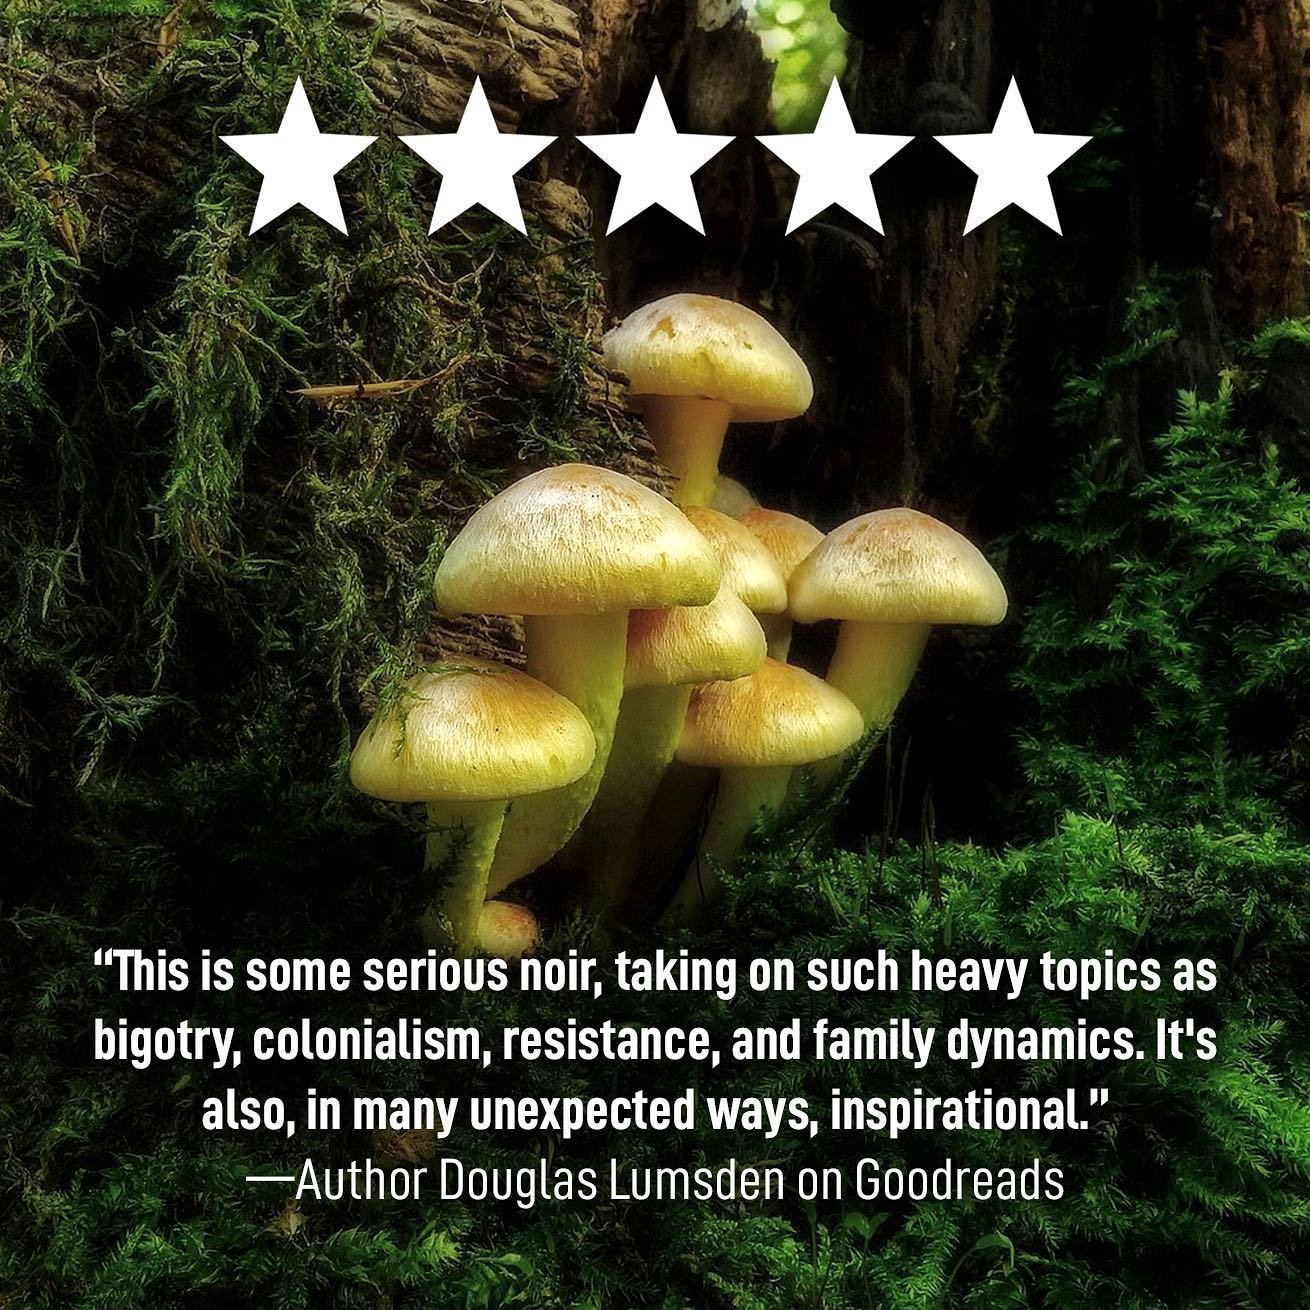 When a fellow SFF noir author drops this 5⭐️ review of my debut novel, #MushroomBlues. Thank you @douglas_lumsden, for making my moldy detective heart melt.

BUY IT TODAY in paperback/hardcover/eBook on Amazon or read it FREE on Kindle Unlimited.
&bu